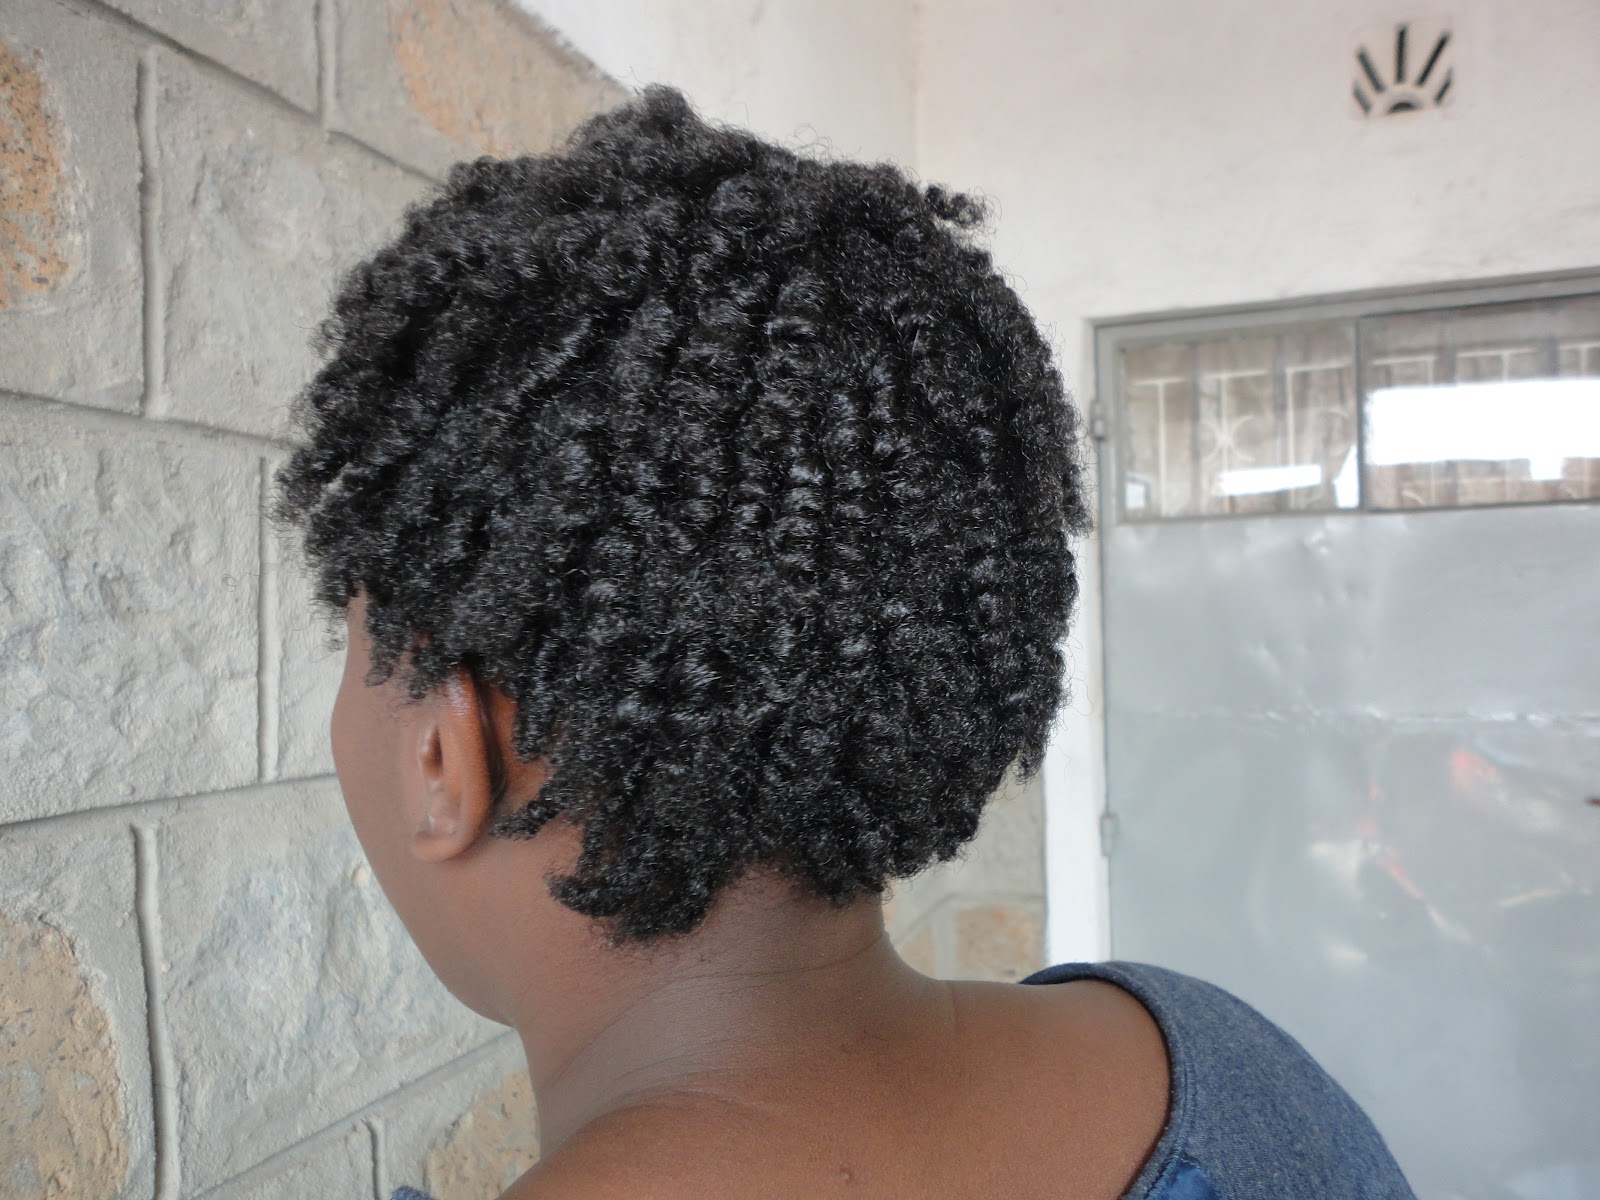 Straw Curls On My Natural Hair – How To Take Care Of Natural Hair